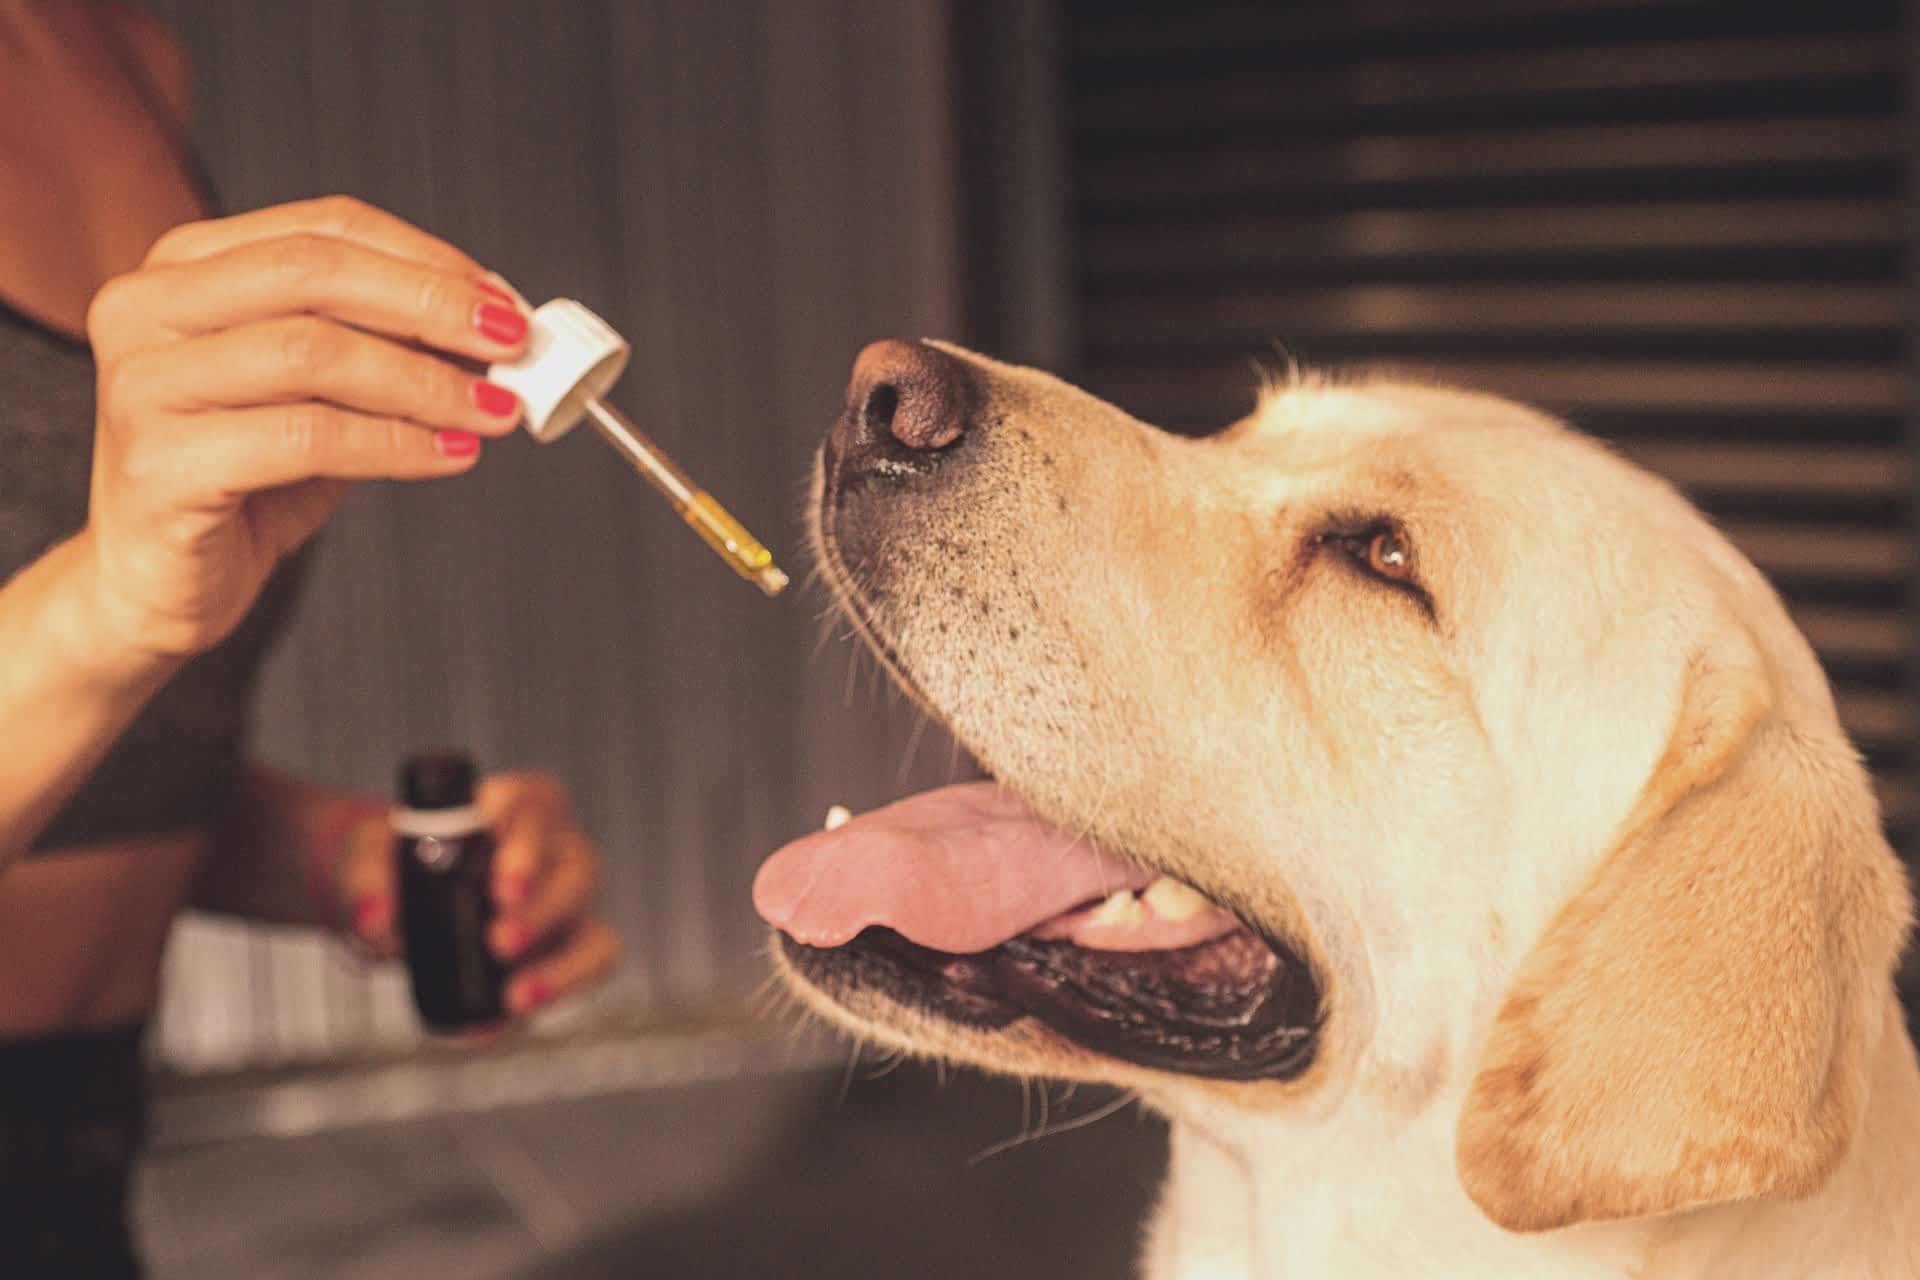 All You Need To Know About CBD for Dogs and Other Pets